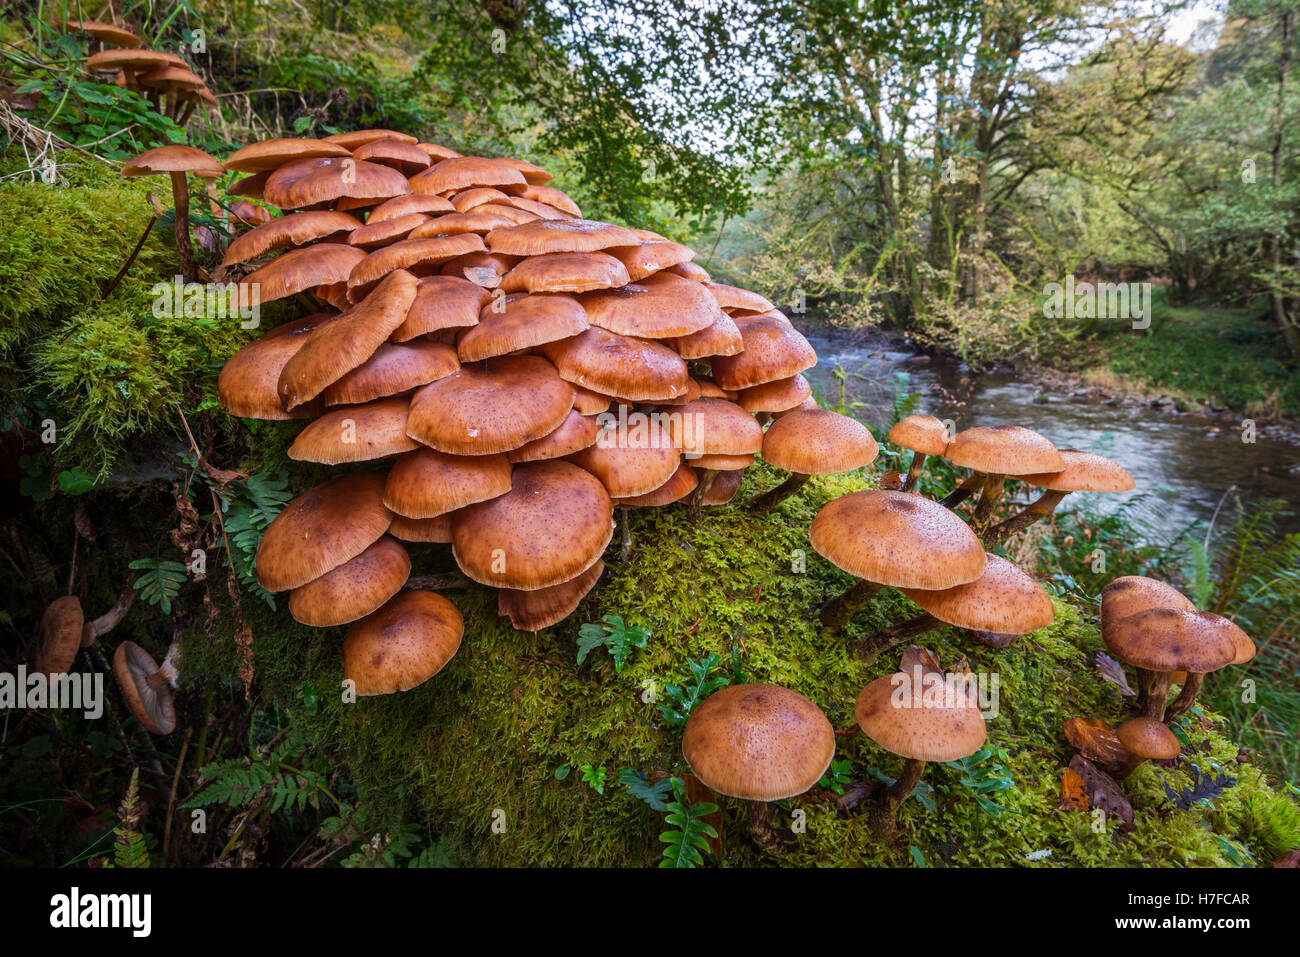 A cluster on honey fungus growing in a woodland habitat Stock Photo